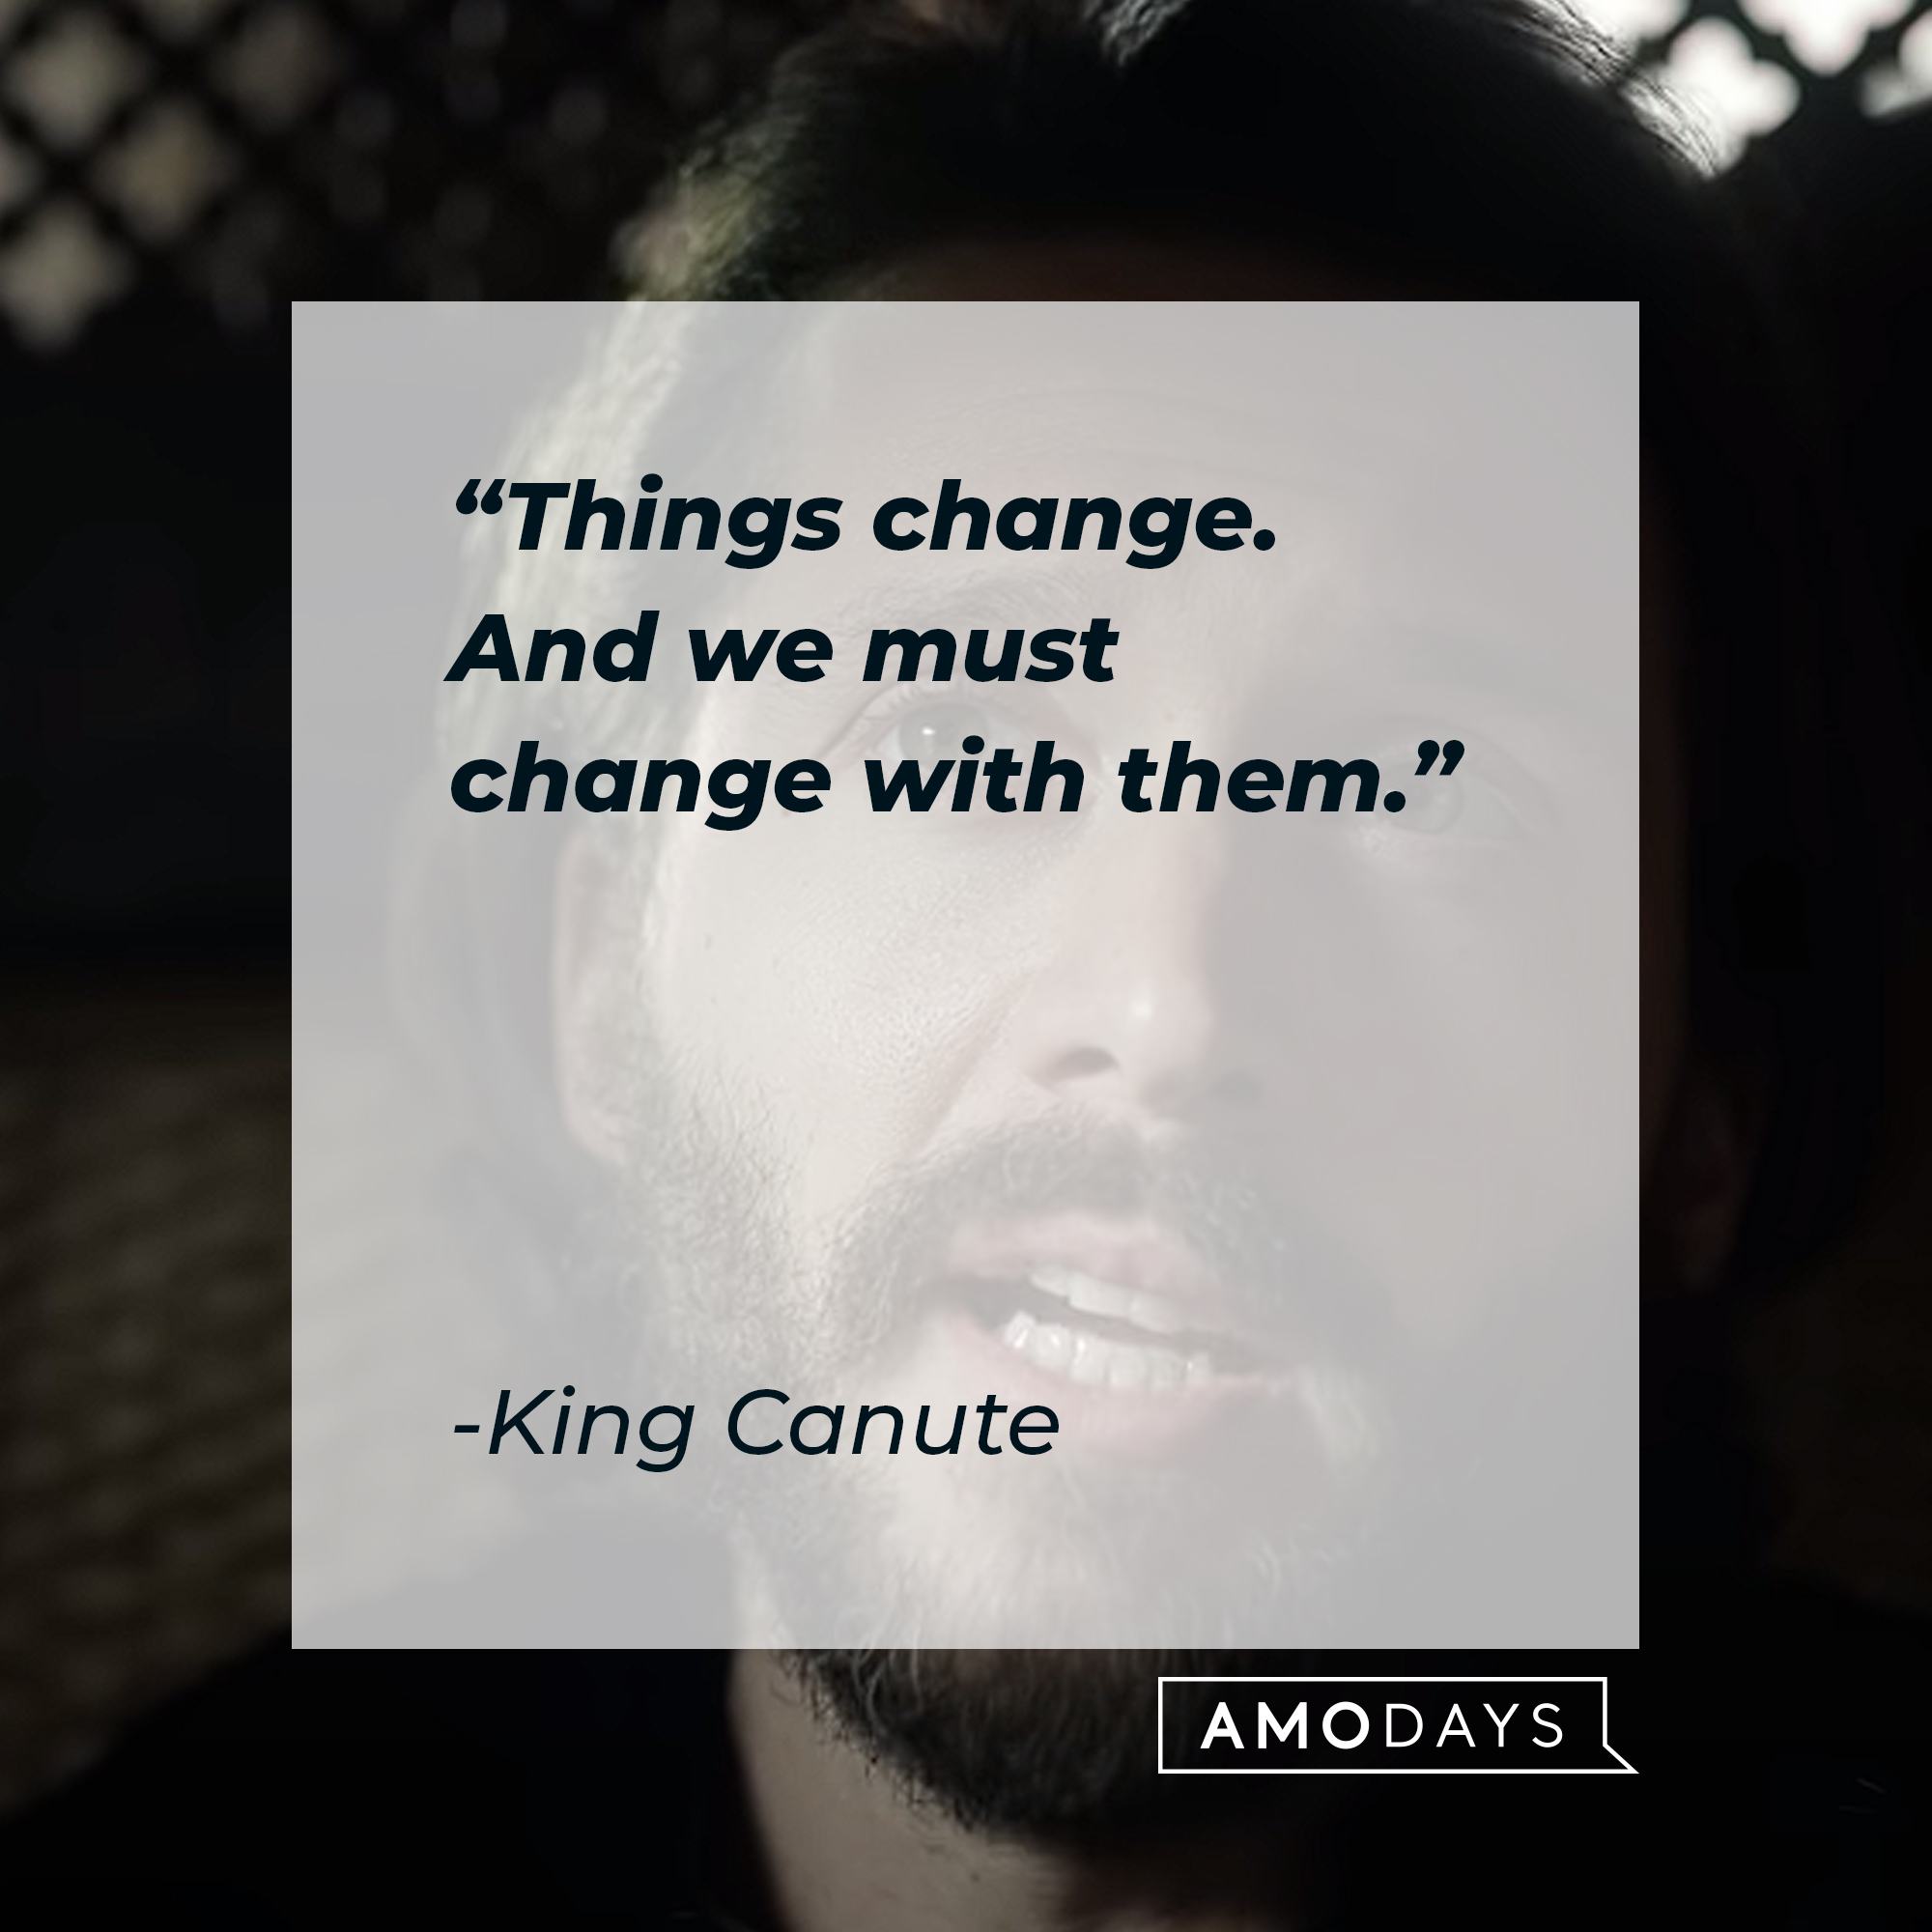 A picture of King Canute with his quote: “Things change. And we must change with them.” | Source: youtube.com/Netflix